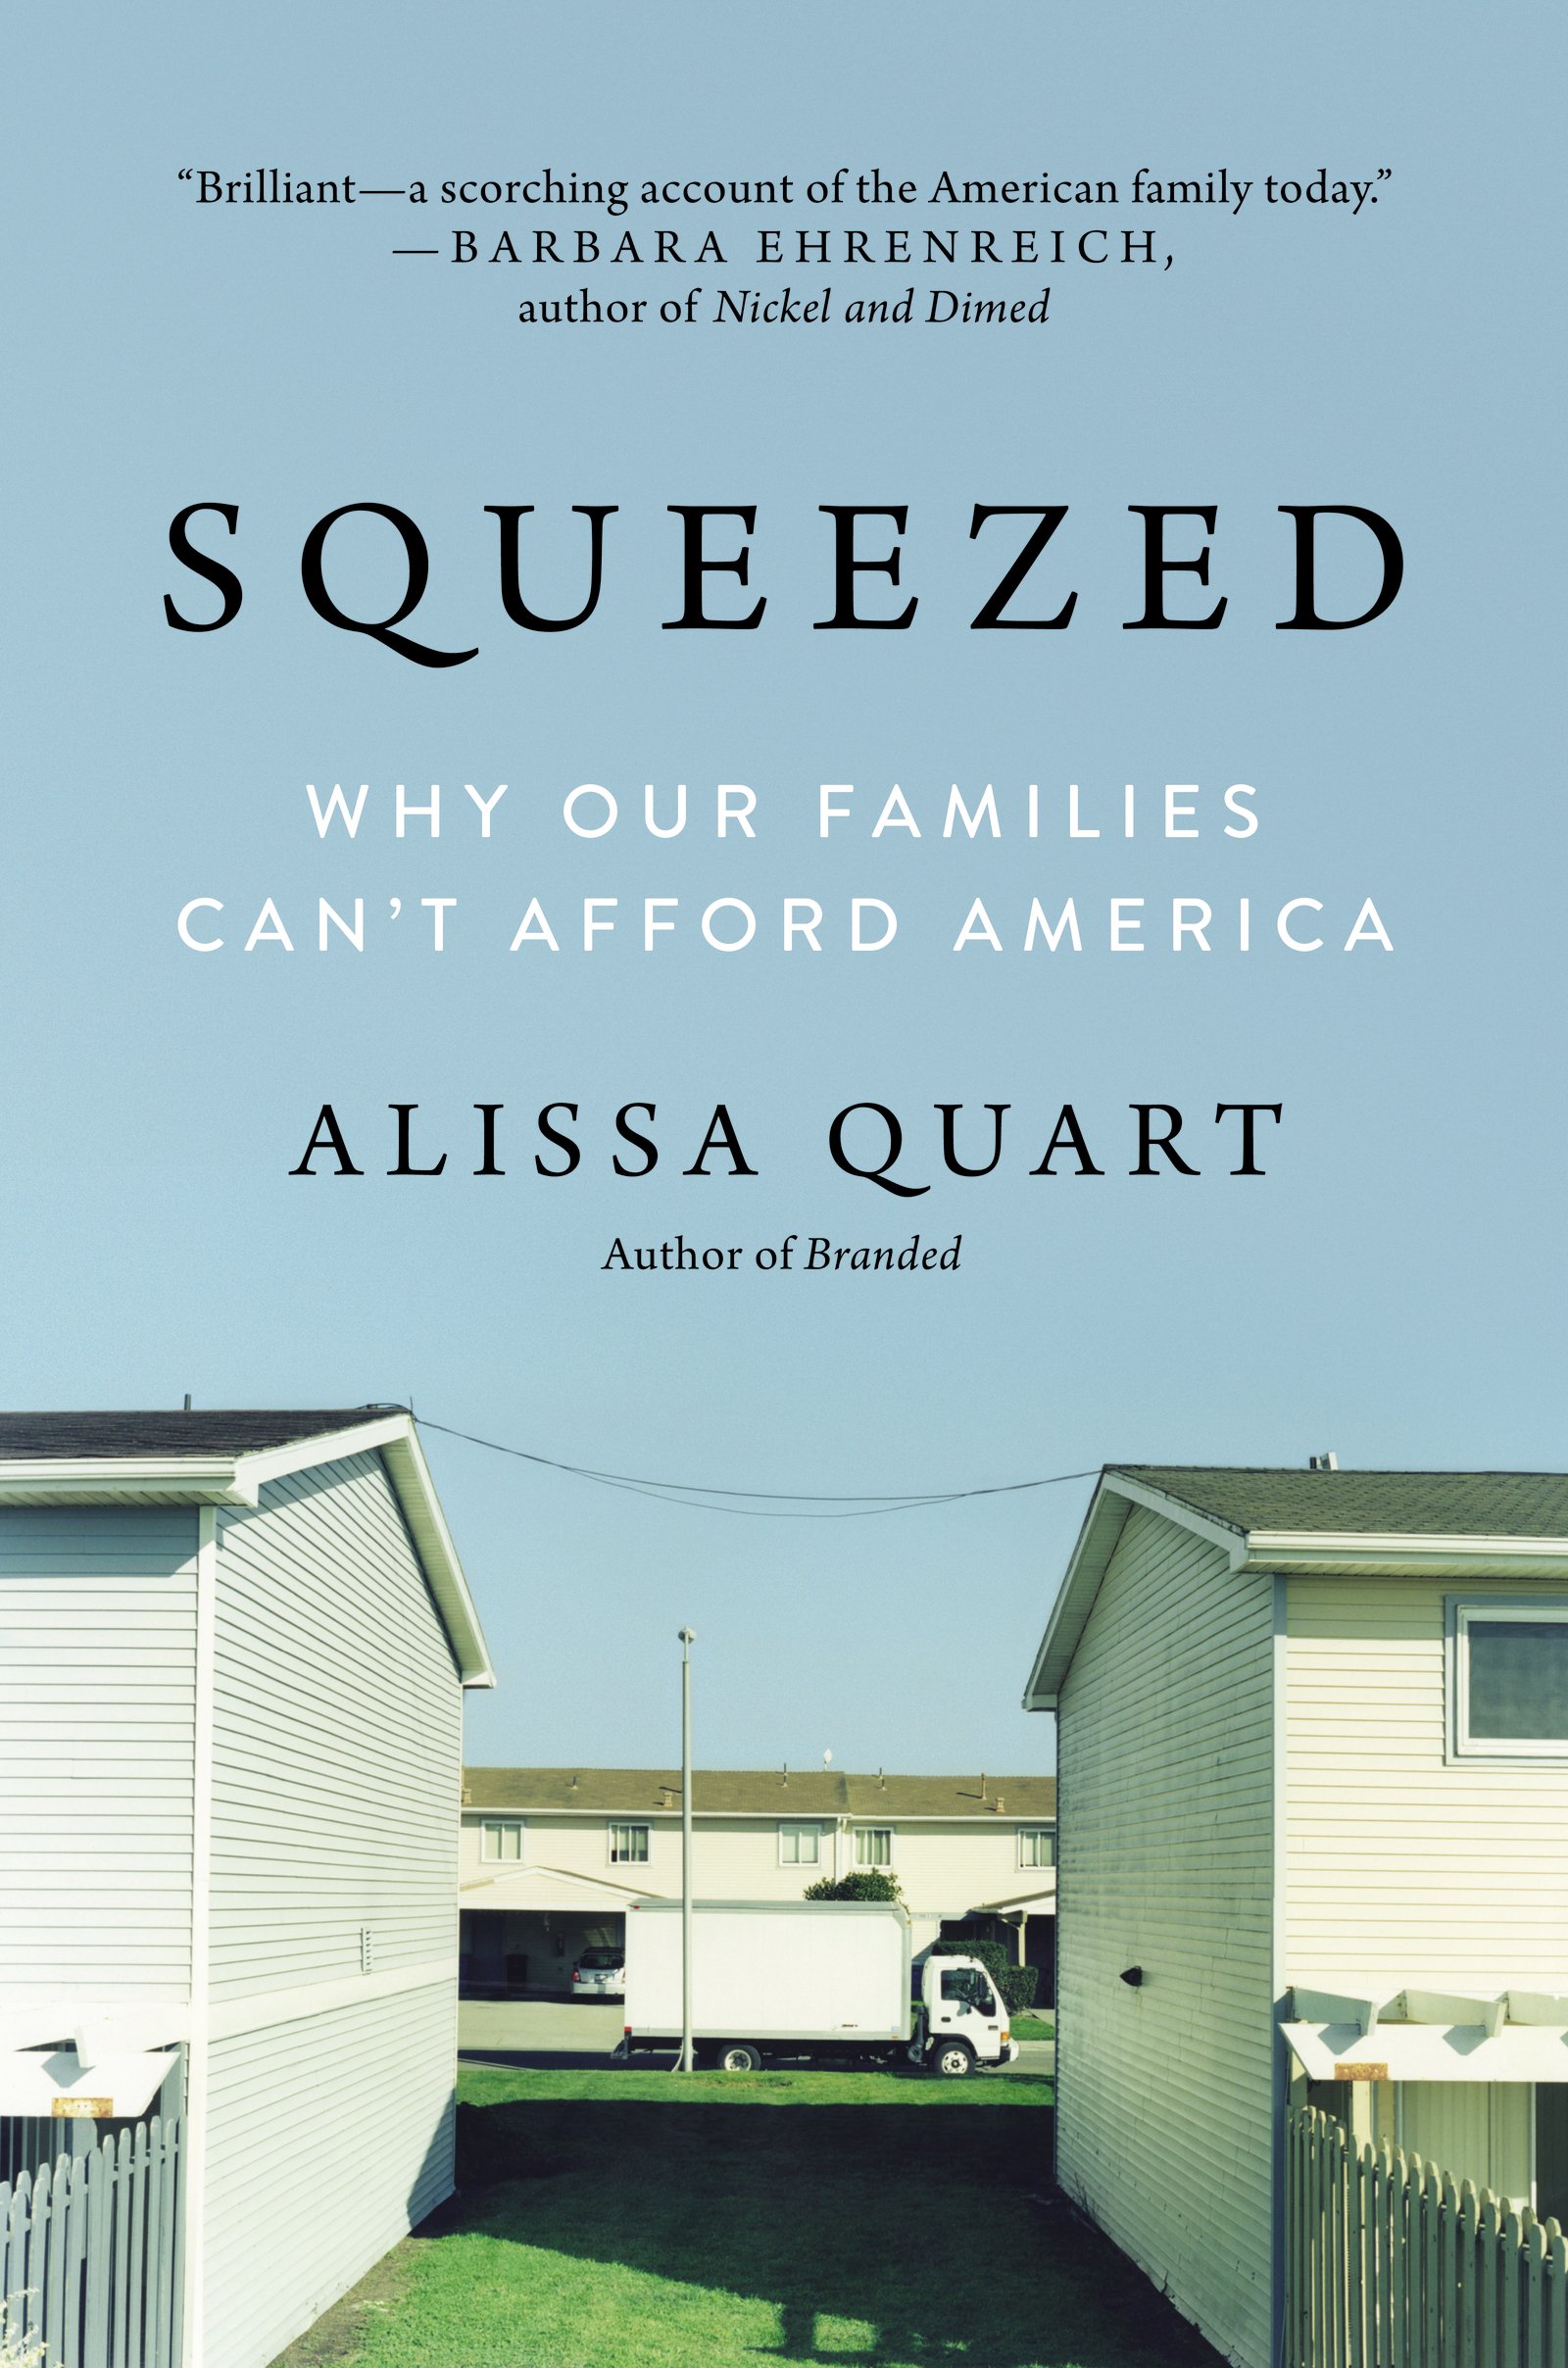 Squeezed: Why Our Families Can't Afford America